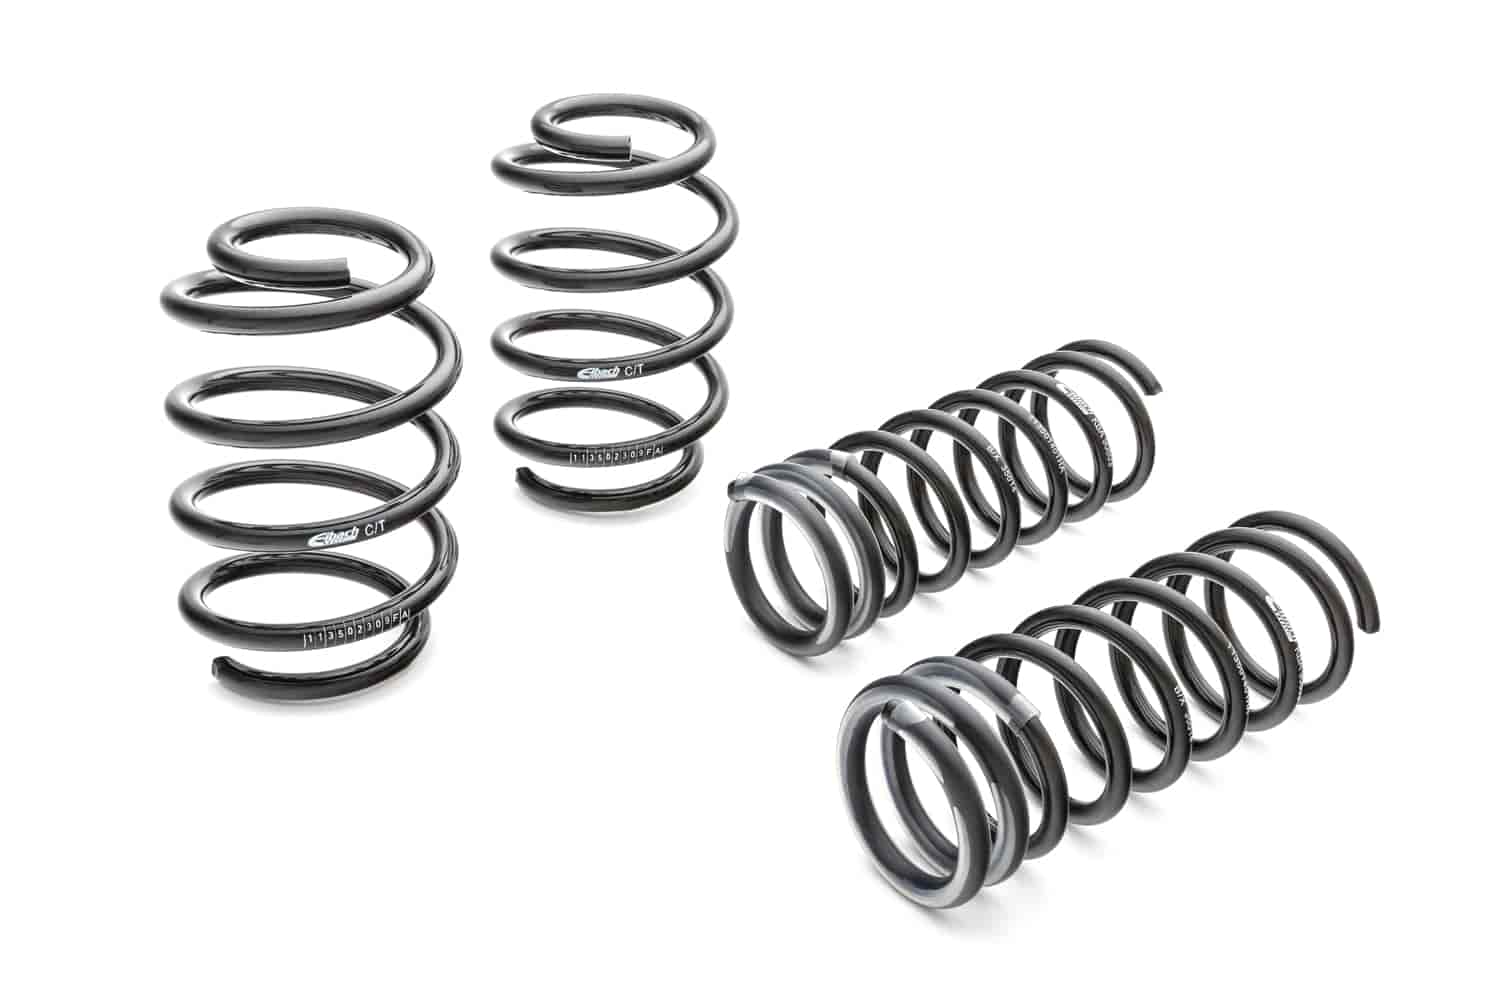 1539.140 Pro-Kit Lowering Springs 1996-2001 A4 Avant Quattro 4-cyl - 1.200 in. Front/Rear Drop